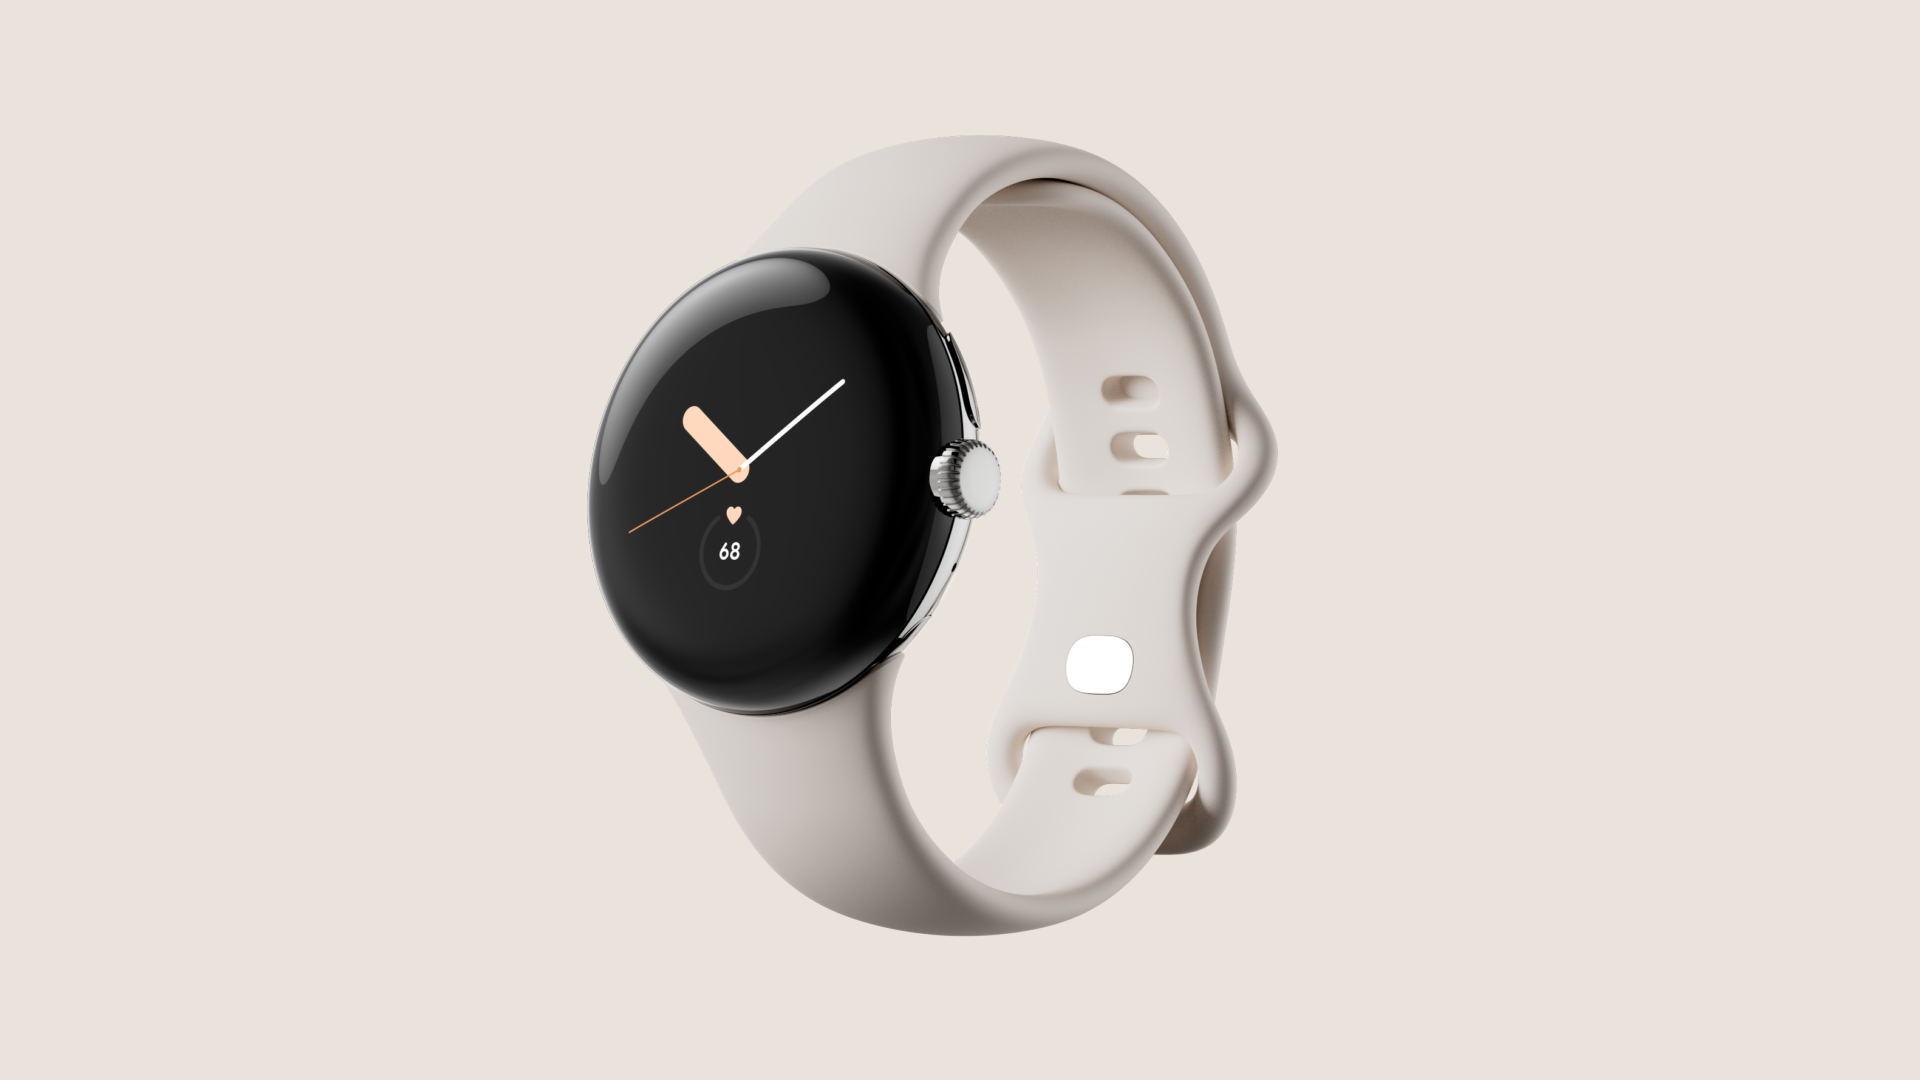 Image of the Google Pixel Watch